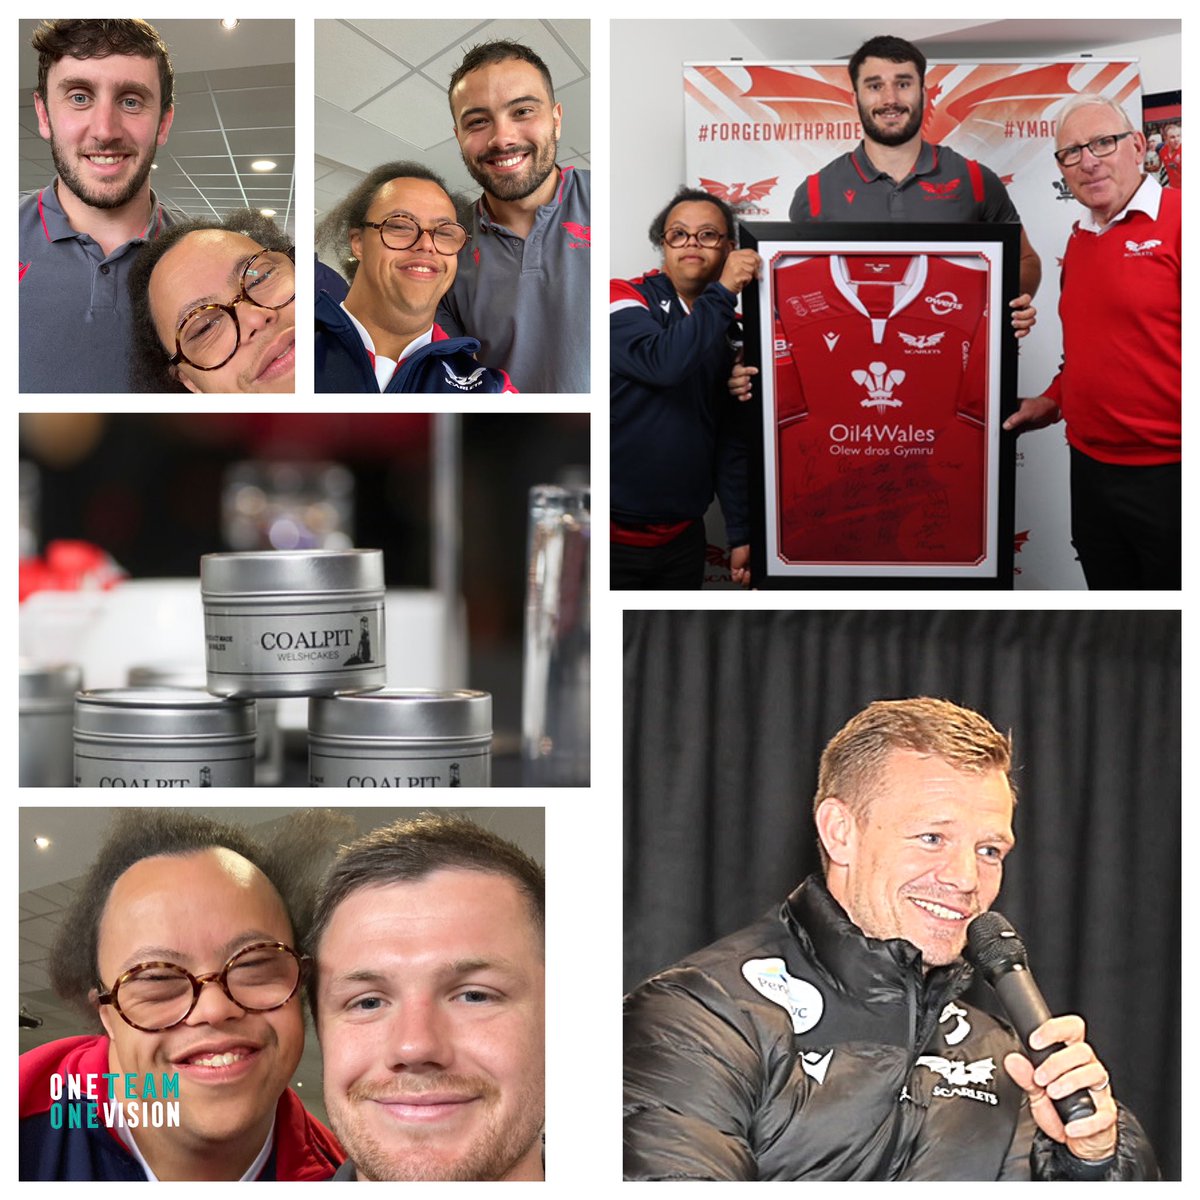 Fantastic time @scarlets_rugby. Thank you showcasing @coalpitwc18 #welsh #cakes at the sponsors function. @MichaelBeynon7 @Food_DrinkWales @FoodDrinkWales #west #wales #MencapMythBuster